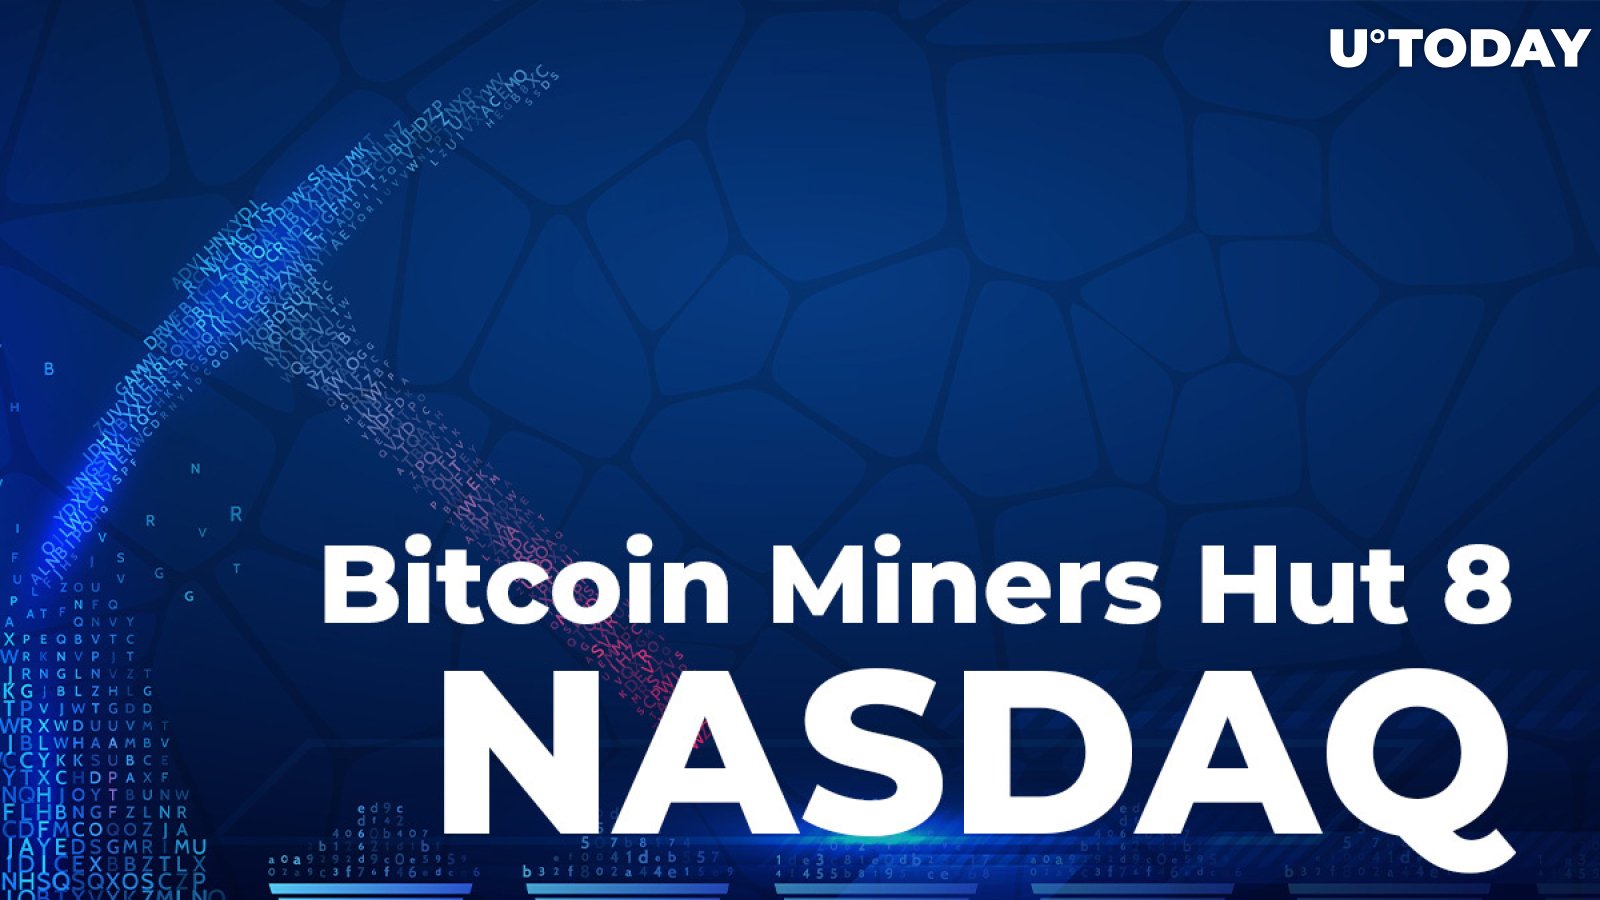 Bitcoin (BTC) Miner Hut 8 Approved by NASDAQ, Microstrategy's Saylor Foresees New Listings